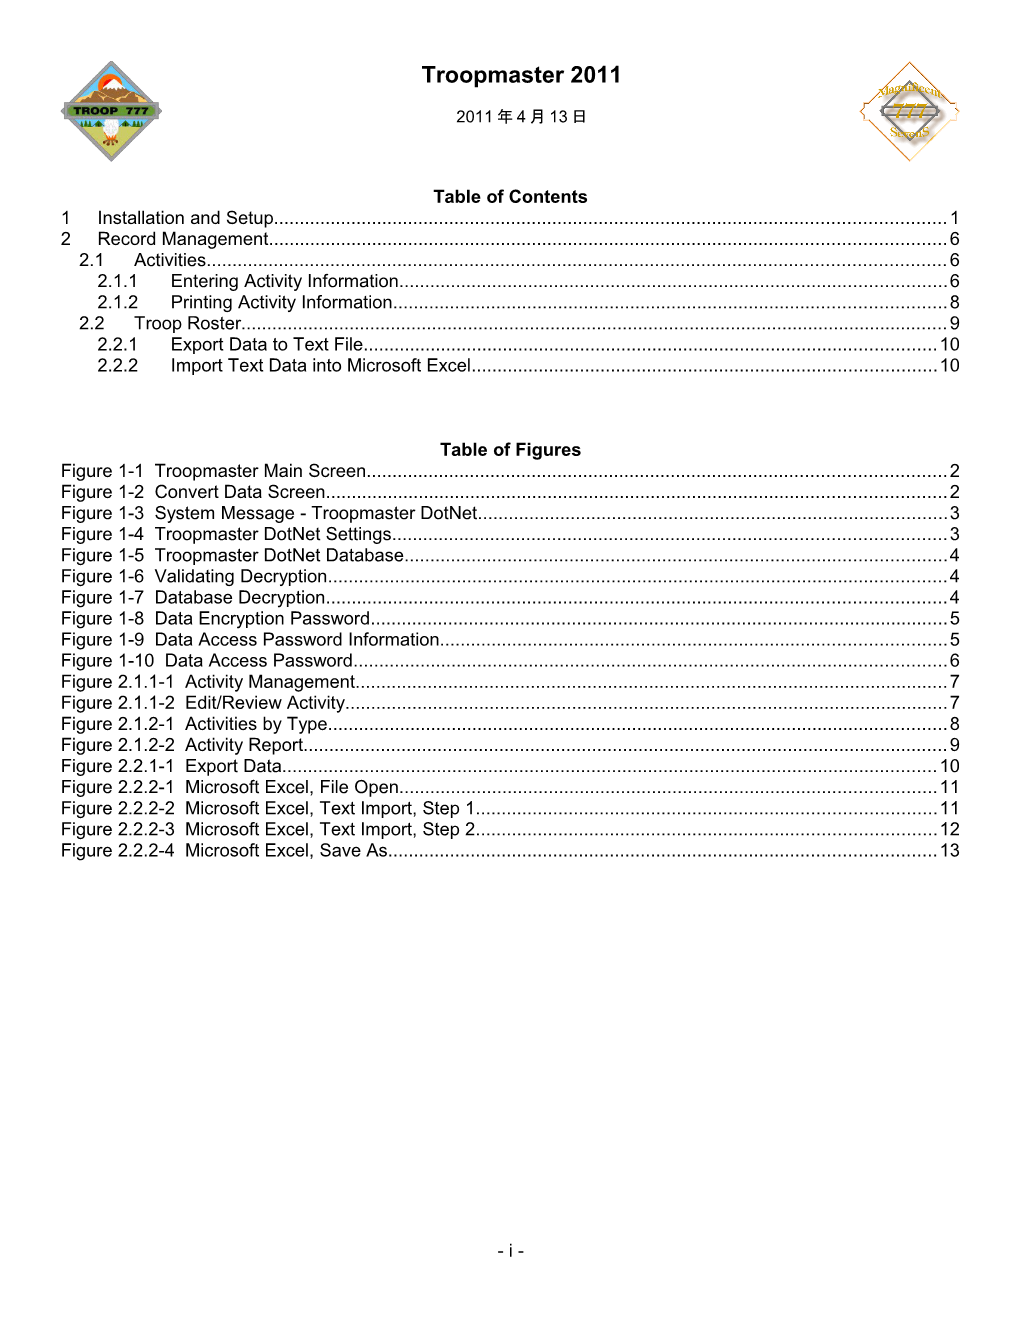 Table of Contents s499